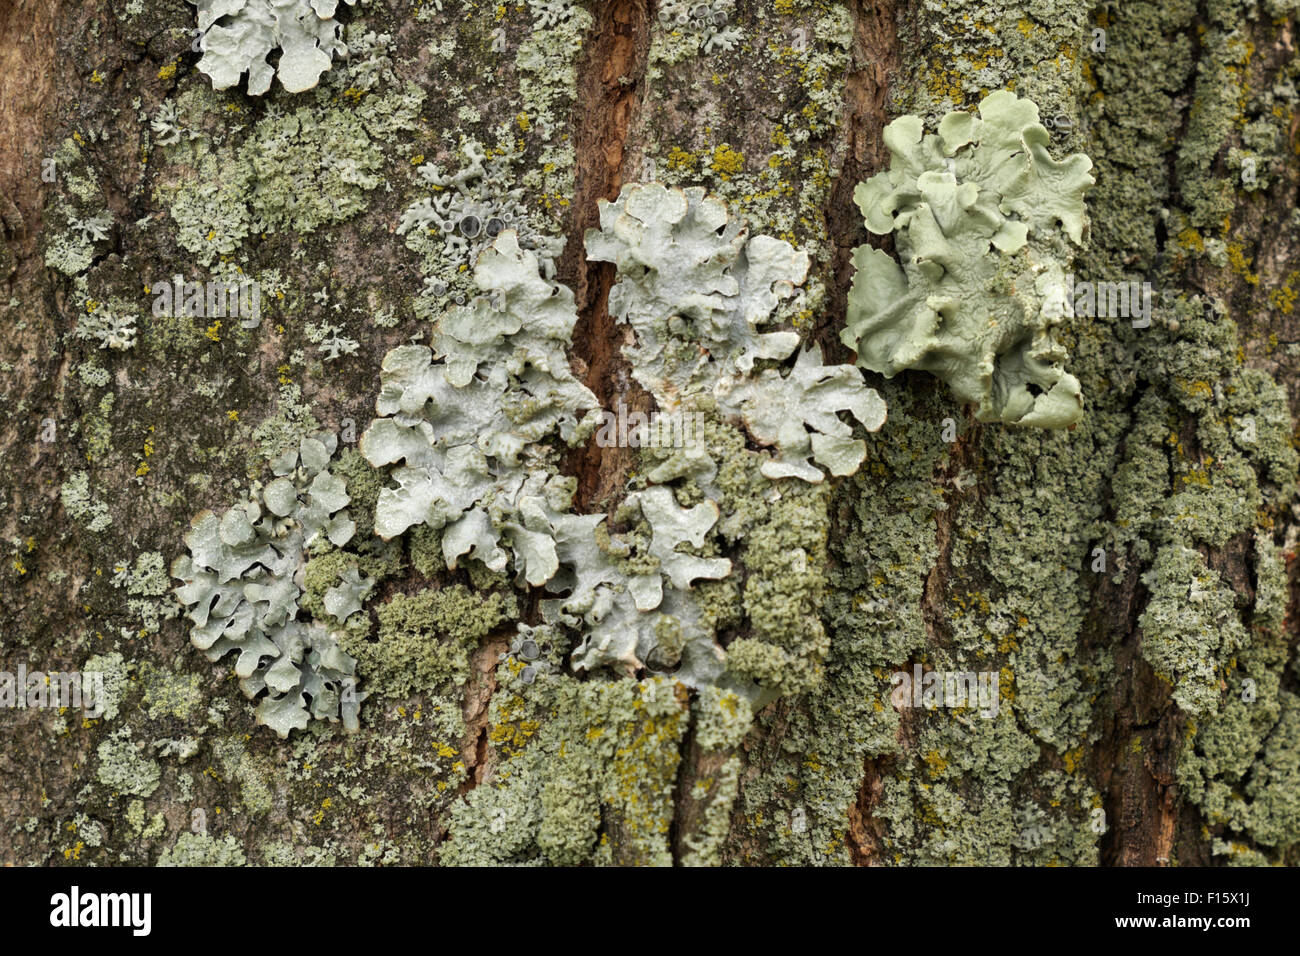 Lichens and moss growing on a Box Elder tree in Michigan. Stock Photo